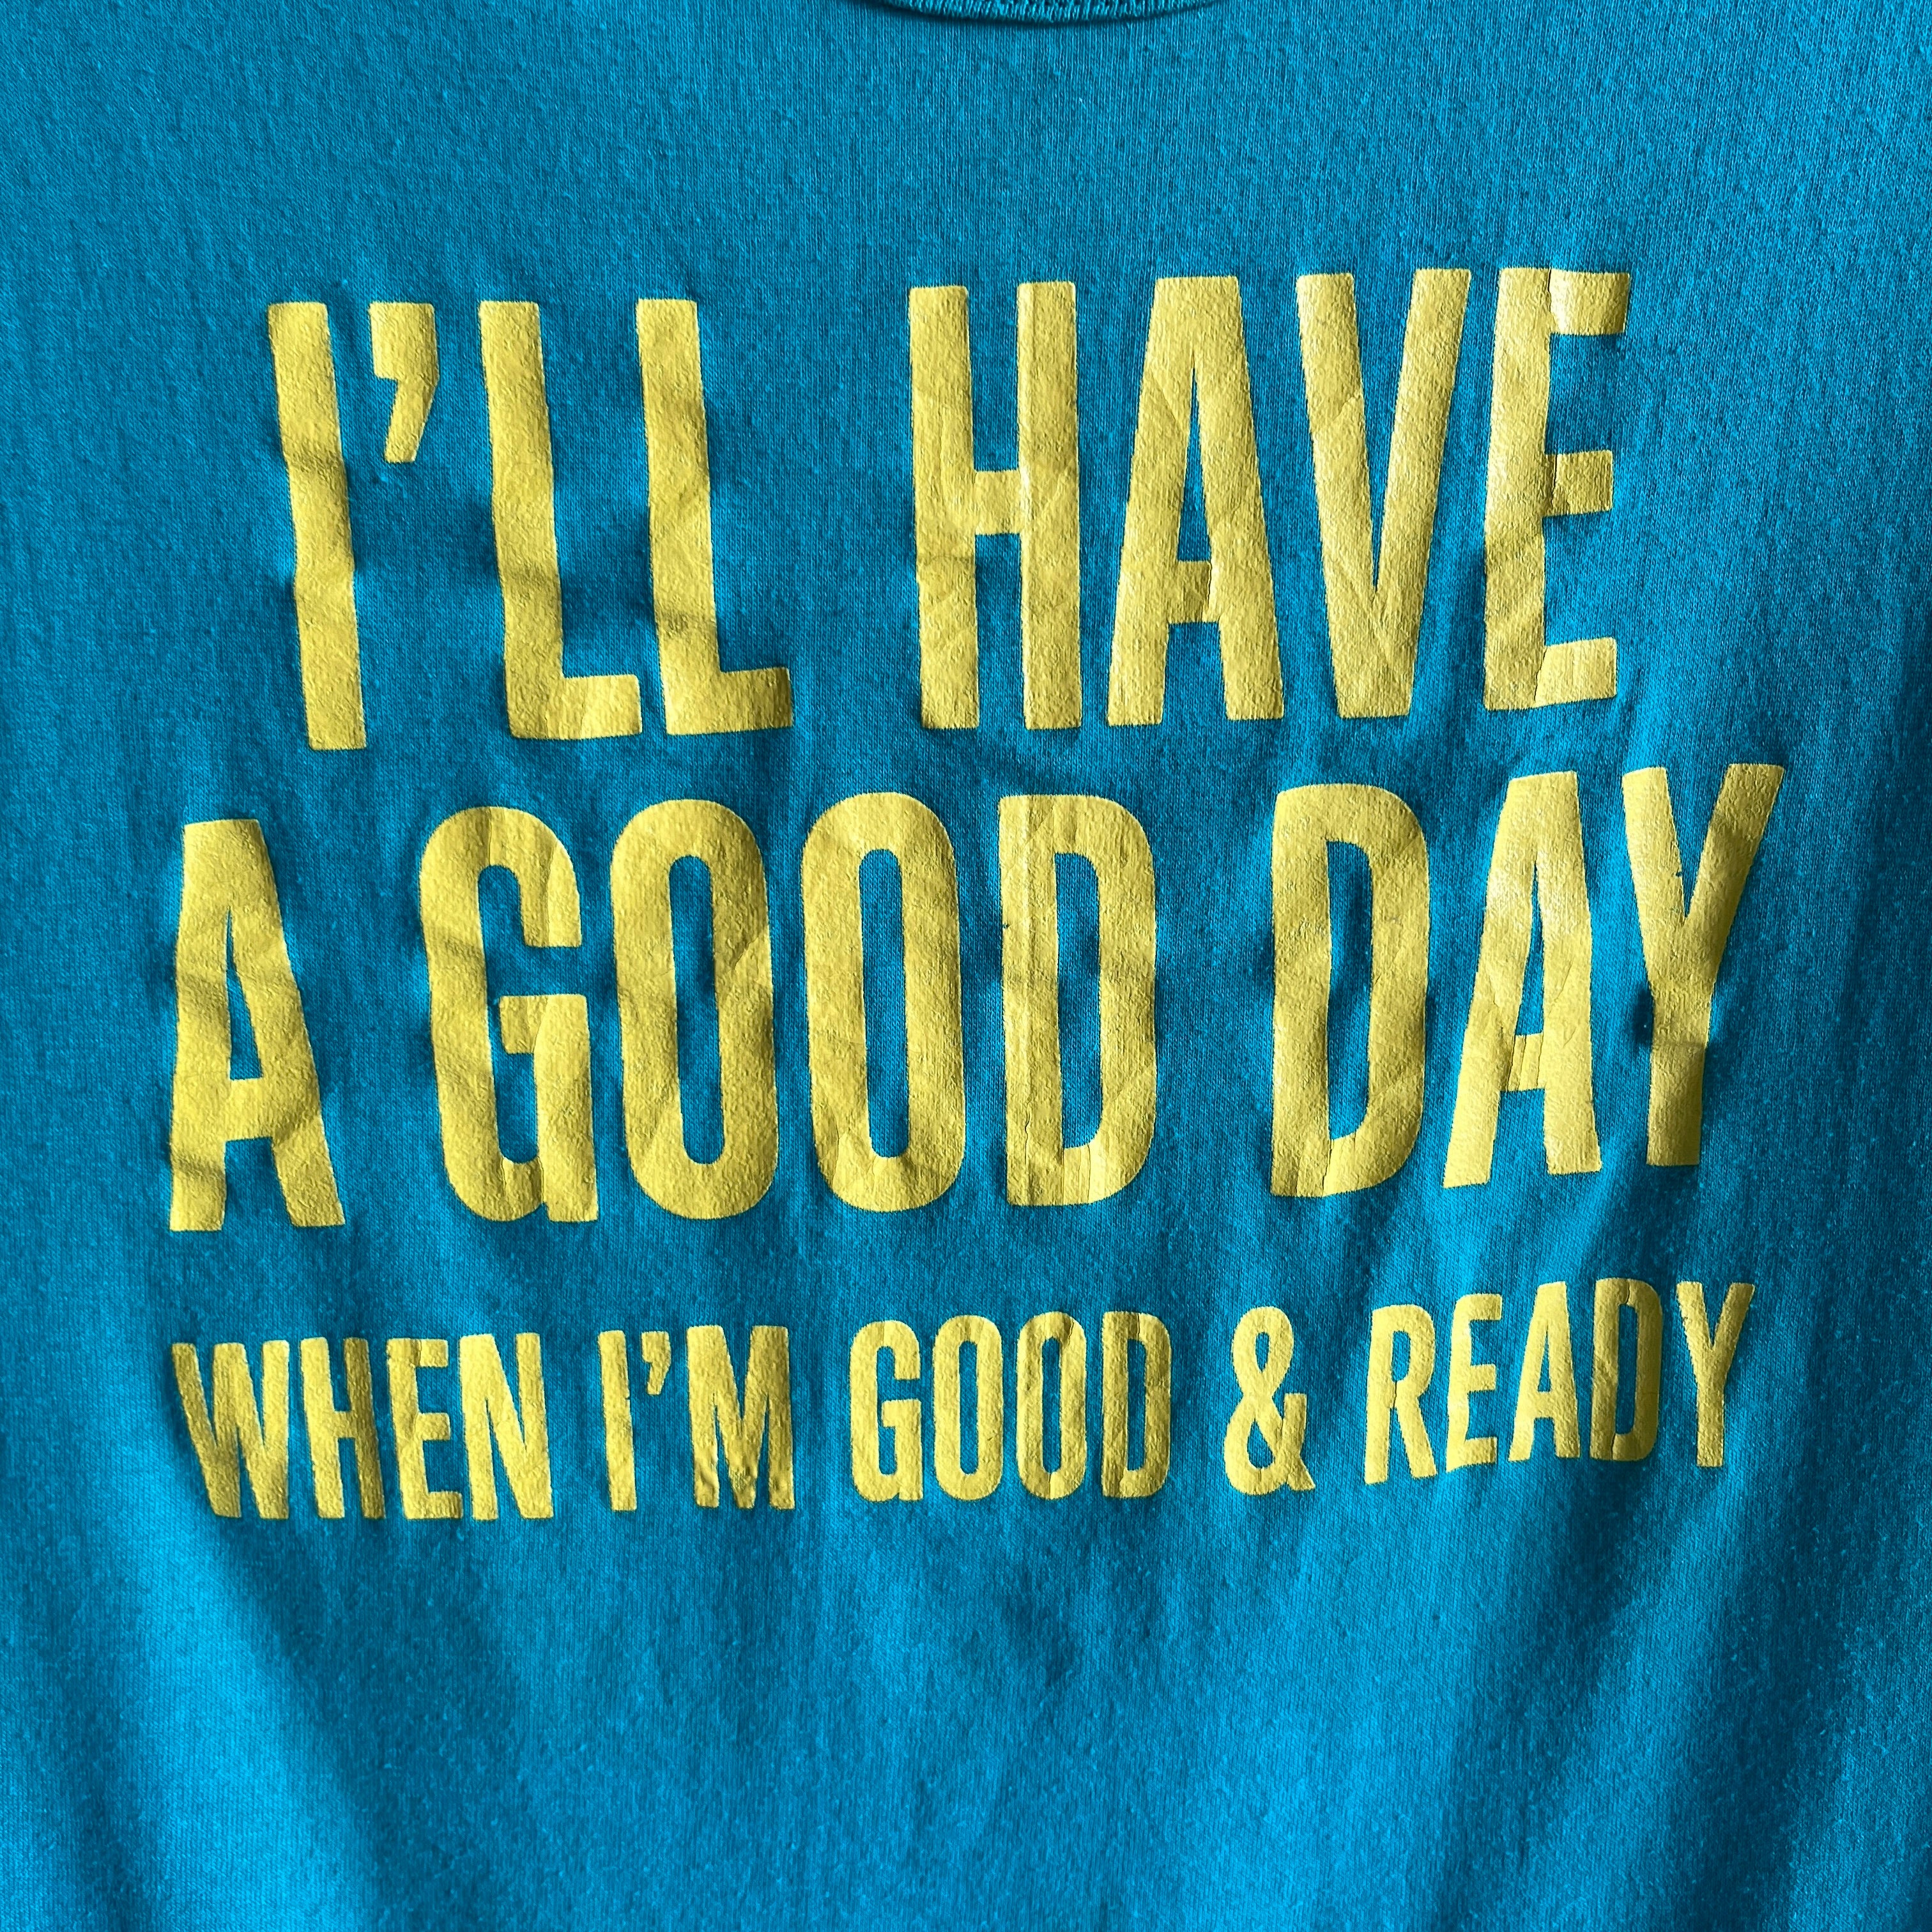 1970/80s I'll Have a Good Day When I'm Good & Ready Tank Top